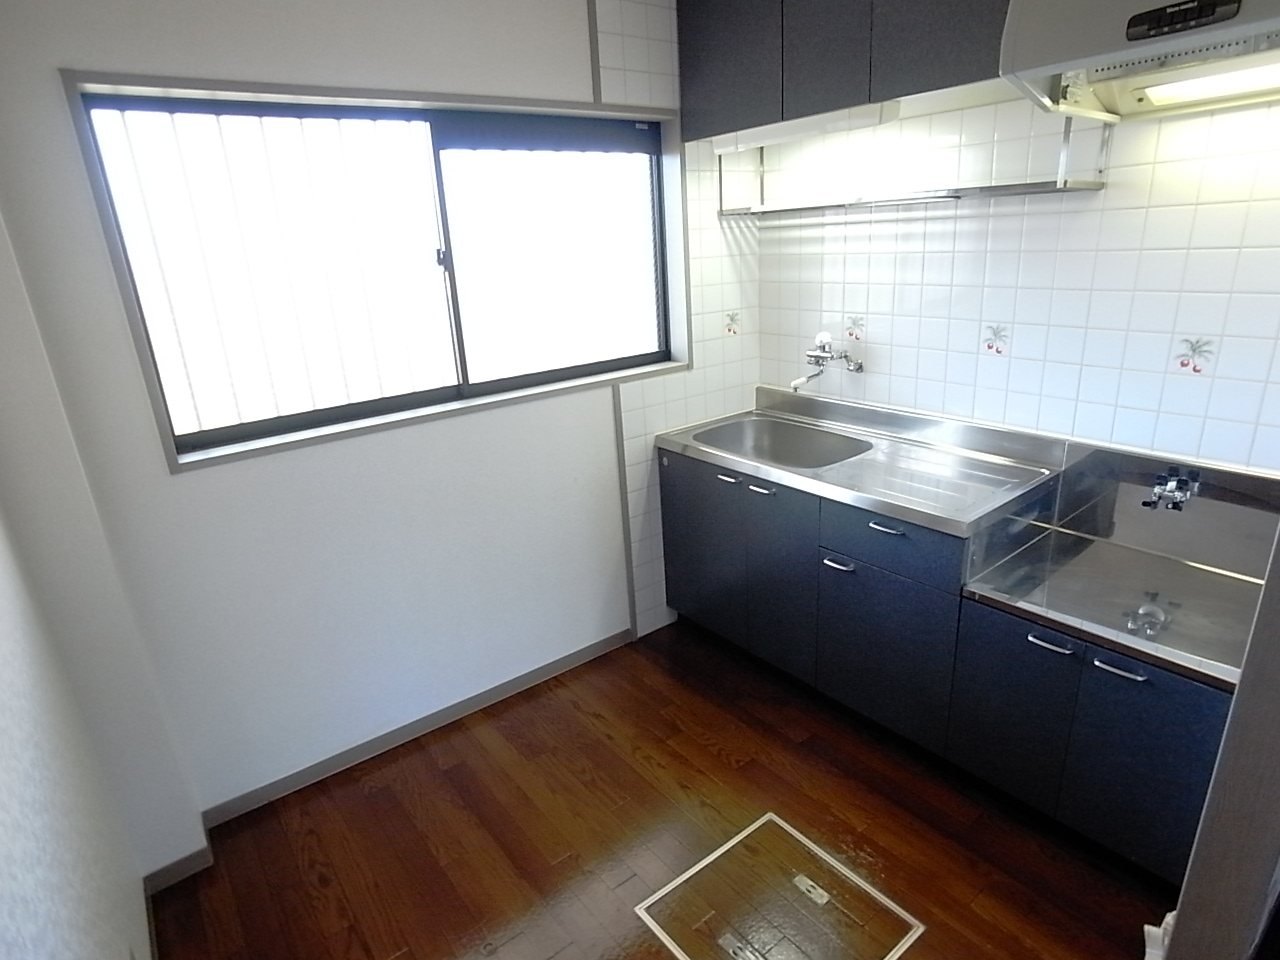 Kitchen. It is easy ventilation and comes with a window. 